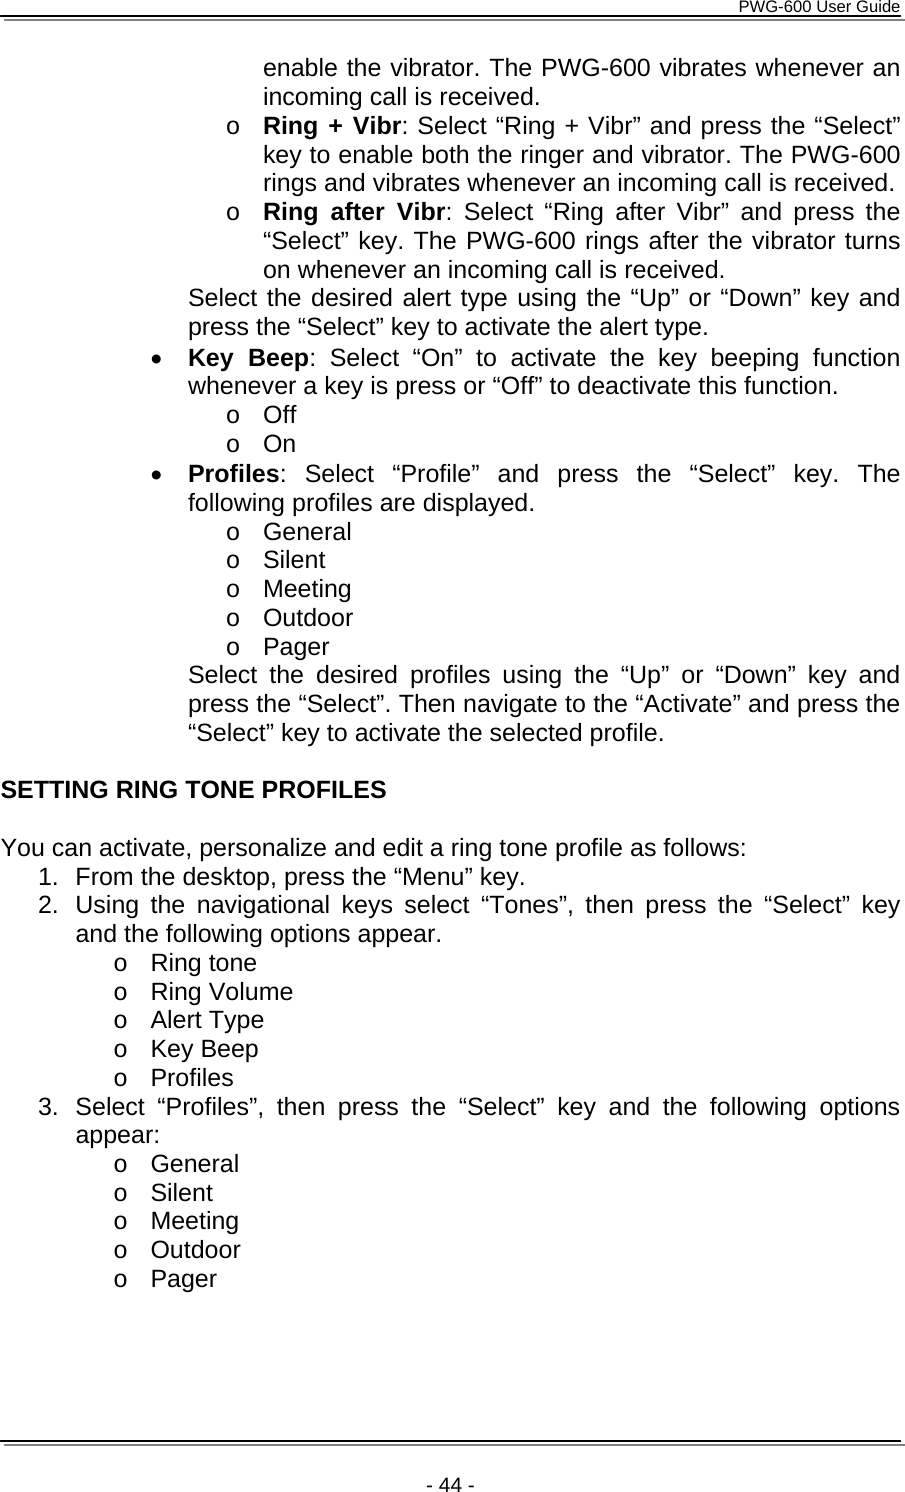      PWG-600 User Guide    - 44 - enable the vibrator. The PWG-600 vibrates whenever an incoming call is received. o Ring + Vibr: Select “Ring + Vibr” and press the “Select” key to enable both the ringer and vibrator. The PWG-600 rings and vibrates whenever an incoming call is received. o Ring after Vibr: Select “Ring after Vibr” and press the “Select” key. The PWG-600 rings after the vibrator turns on whenever an incoming call is received. Select the desired alert type using the “Up” or “Down” key and press the “Select” key to activate the alert type. • Key Beep: Select “On” to activate the key beeping function whenever a key is press or “Off” to deactivate this function.  o Off o On • Profiles: Select “Profile” and press the “Select” key. The following profiles are displayed. o General o Silent o Meeting o Outdoor o Pager Select the desired profiles using the “Up” or “Down” key and press the “Select”. Then navigate to the “Activate” and press the “Select” key to activate the selected profile.  SETTING RING TONE PROFILES  You can activate, personalize and edit a ring tone profile as follows: 1.  From the desktop, press the “Menu” key. 2. Using the navigational keys select “Tones”, then press the “Select” key and the following options appear. o Ring tone o Ring Volume o Alert Type o Key Beep o Profiles 3.  Select “Profiles”, then press the “Select” key and the following options appear: o General o Silent o Meeting o Outdoor o Pager 